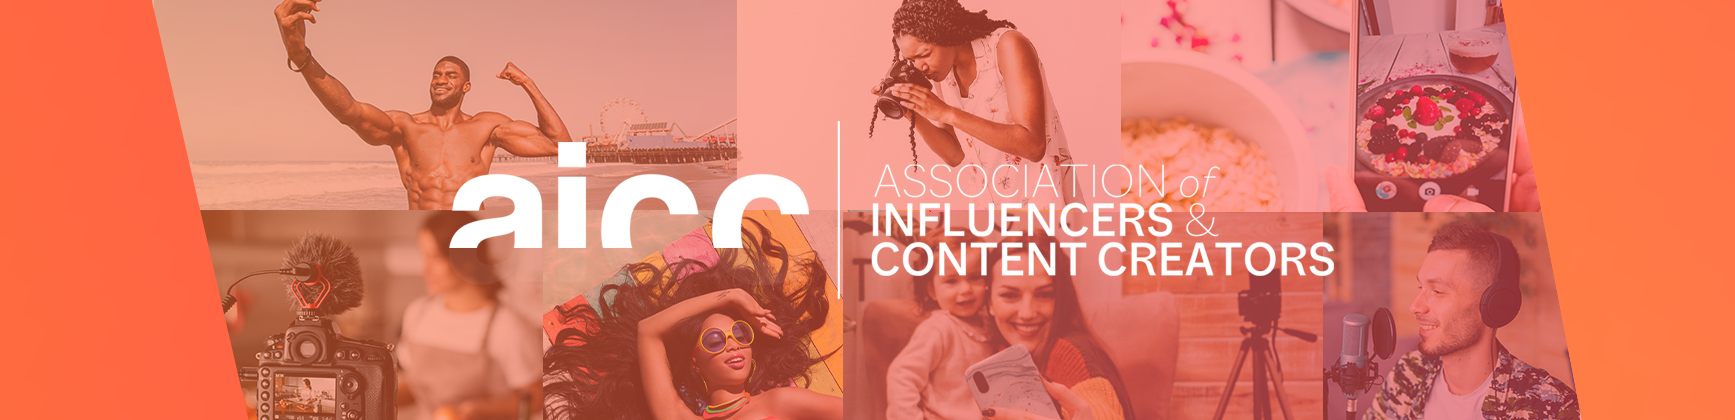 AICC — Actually, The First Trade Organization Founded by Influencers in 2019, Relaunches